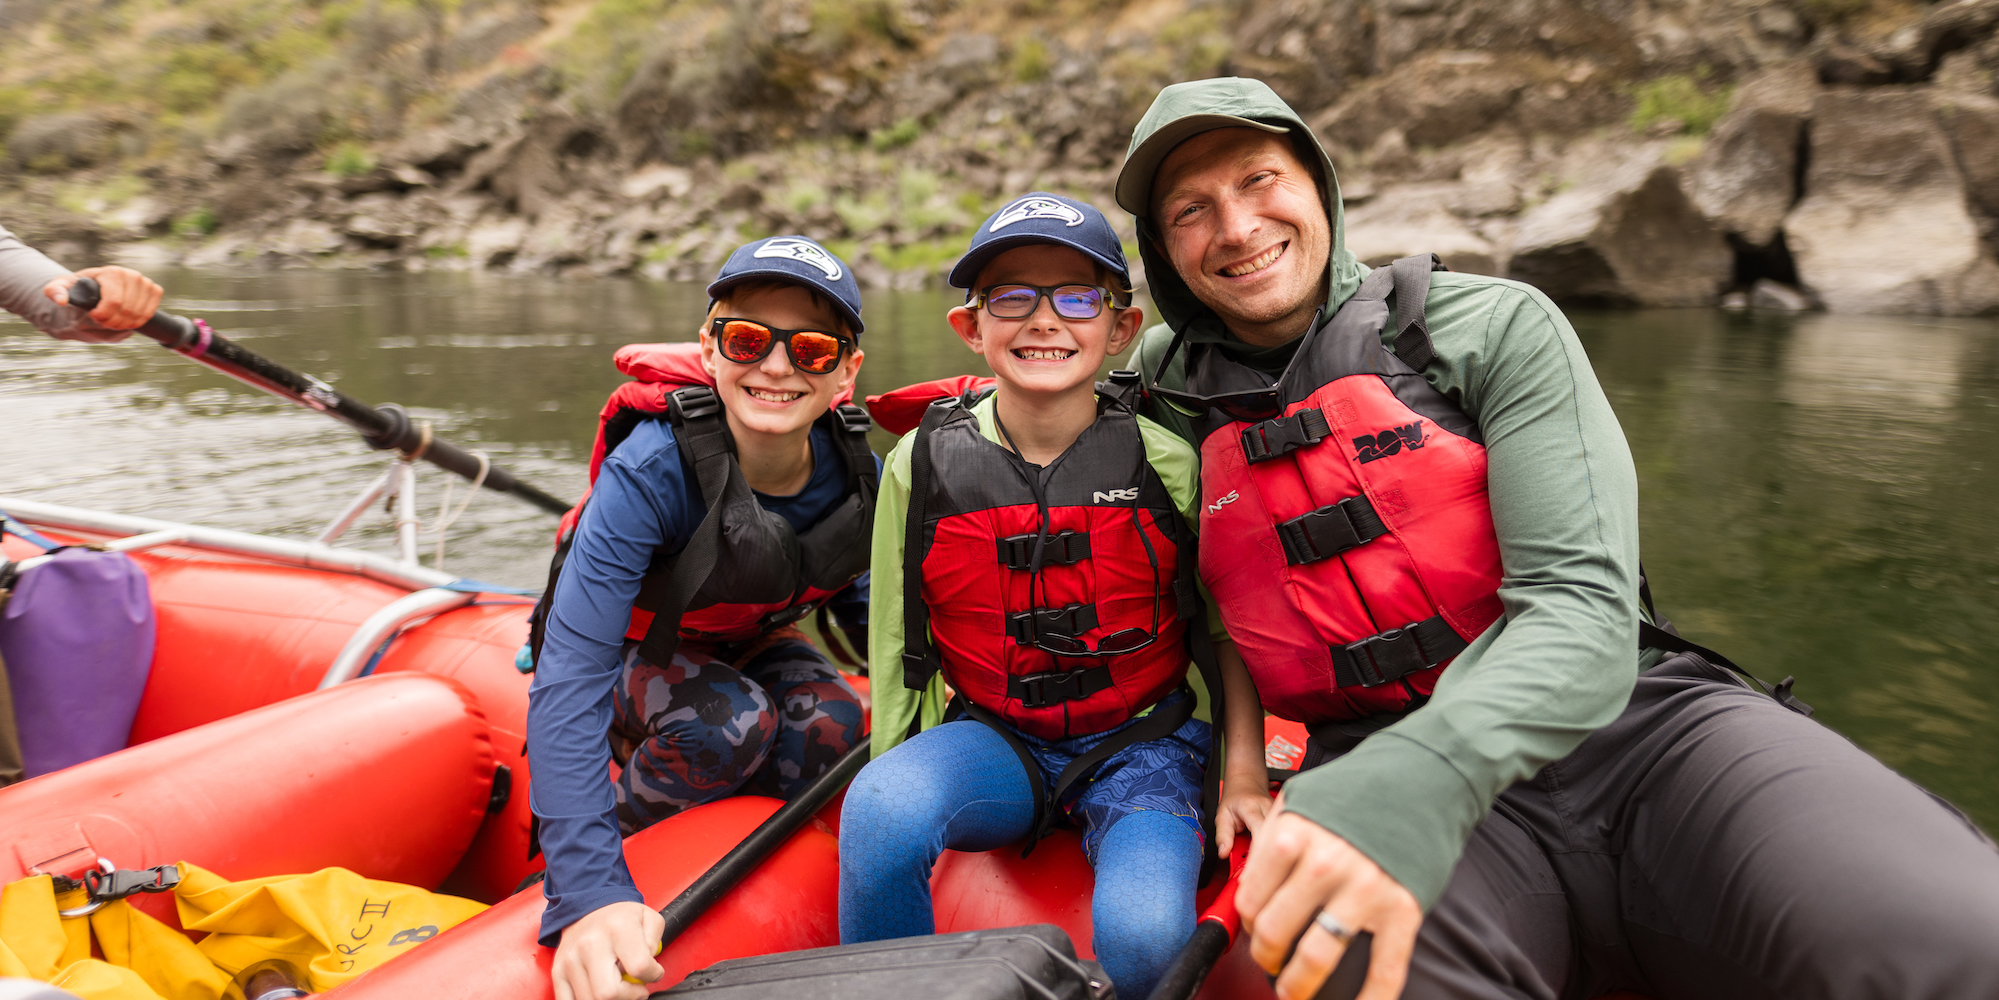 A dad and his two sons sitting on a red whitewater raft smiling together